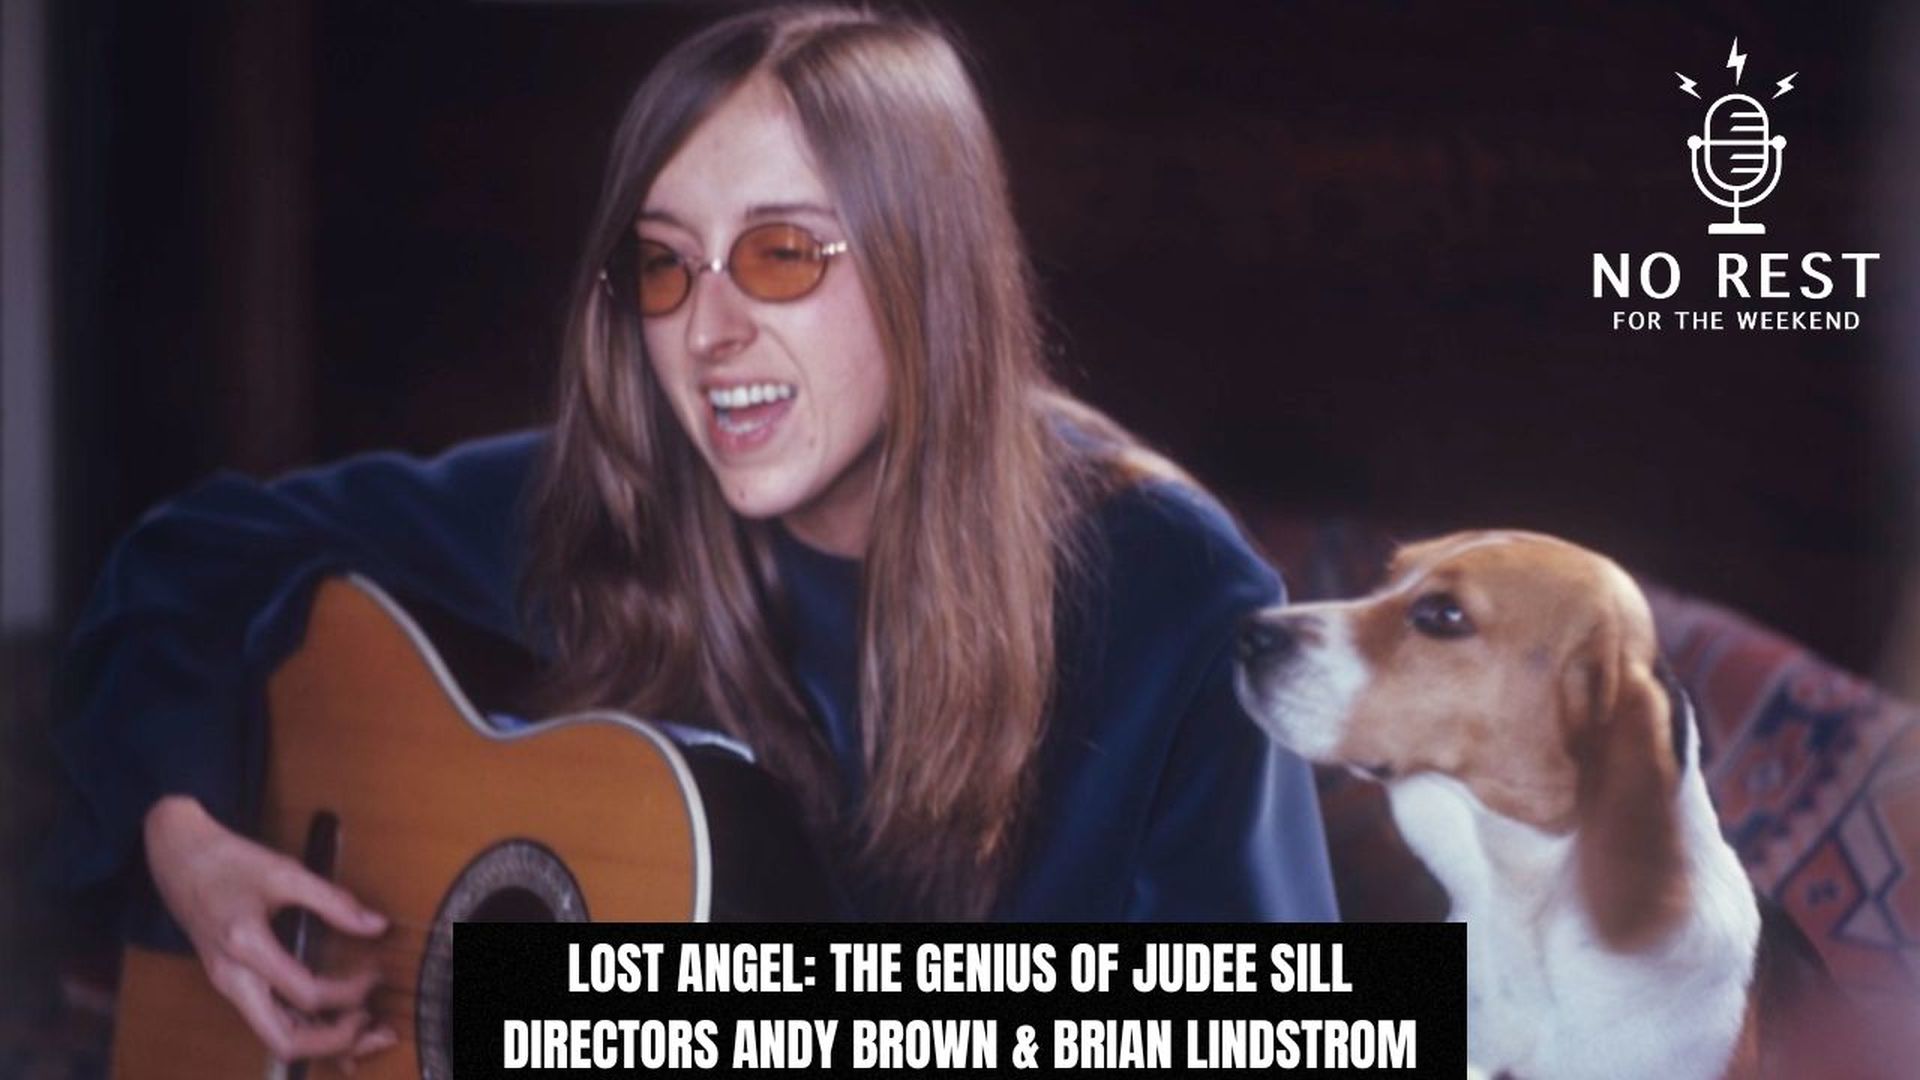 Episode 1503: Lost Angel: The Genius of Judee Sill Directors Andy Brown & Brian Lindstrom